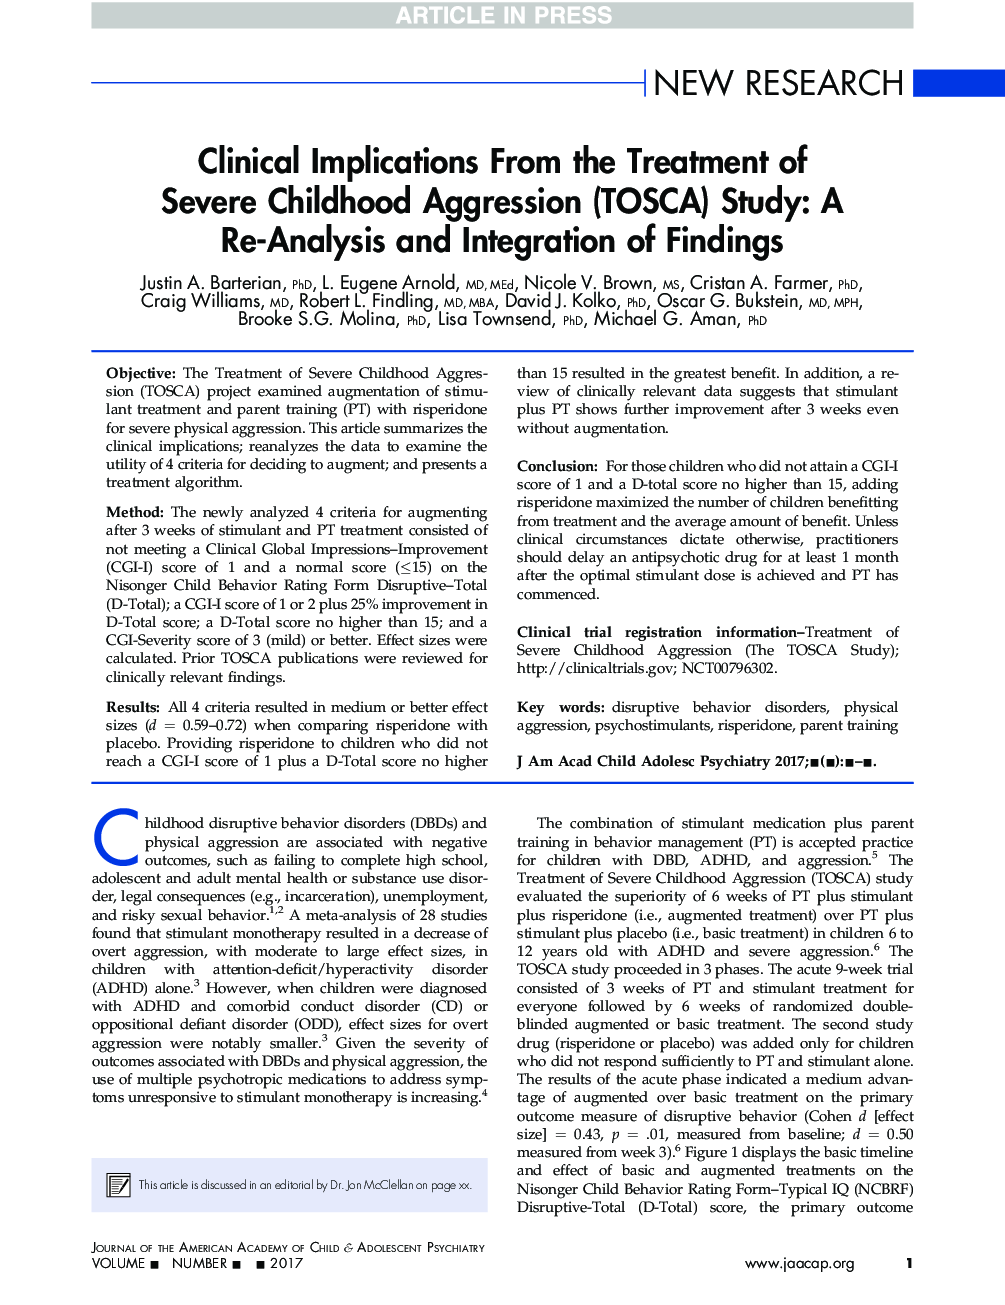 Clinical Implications From the Treatment of Severe Childhood Aggression (TOSCA) Study: A Re-Analysis and Integration of Findings